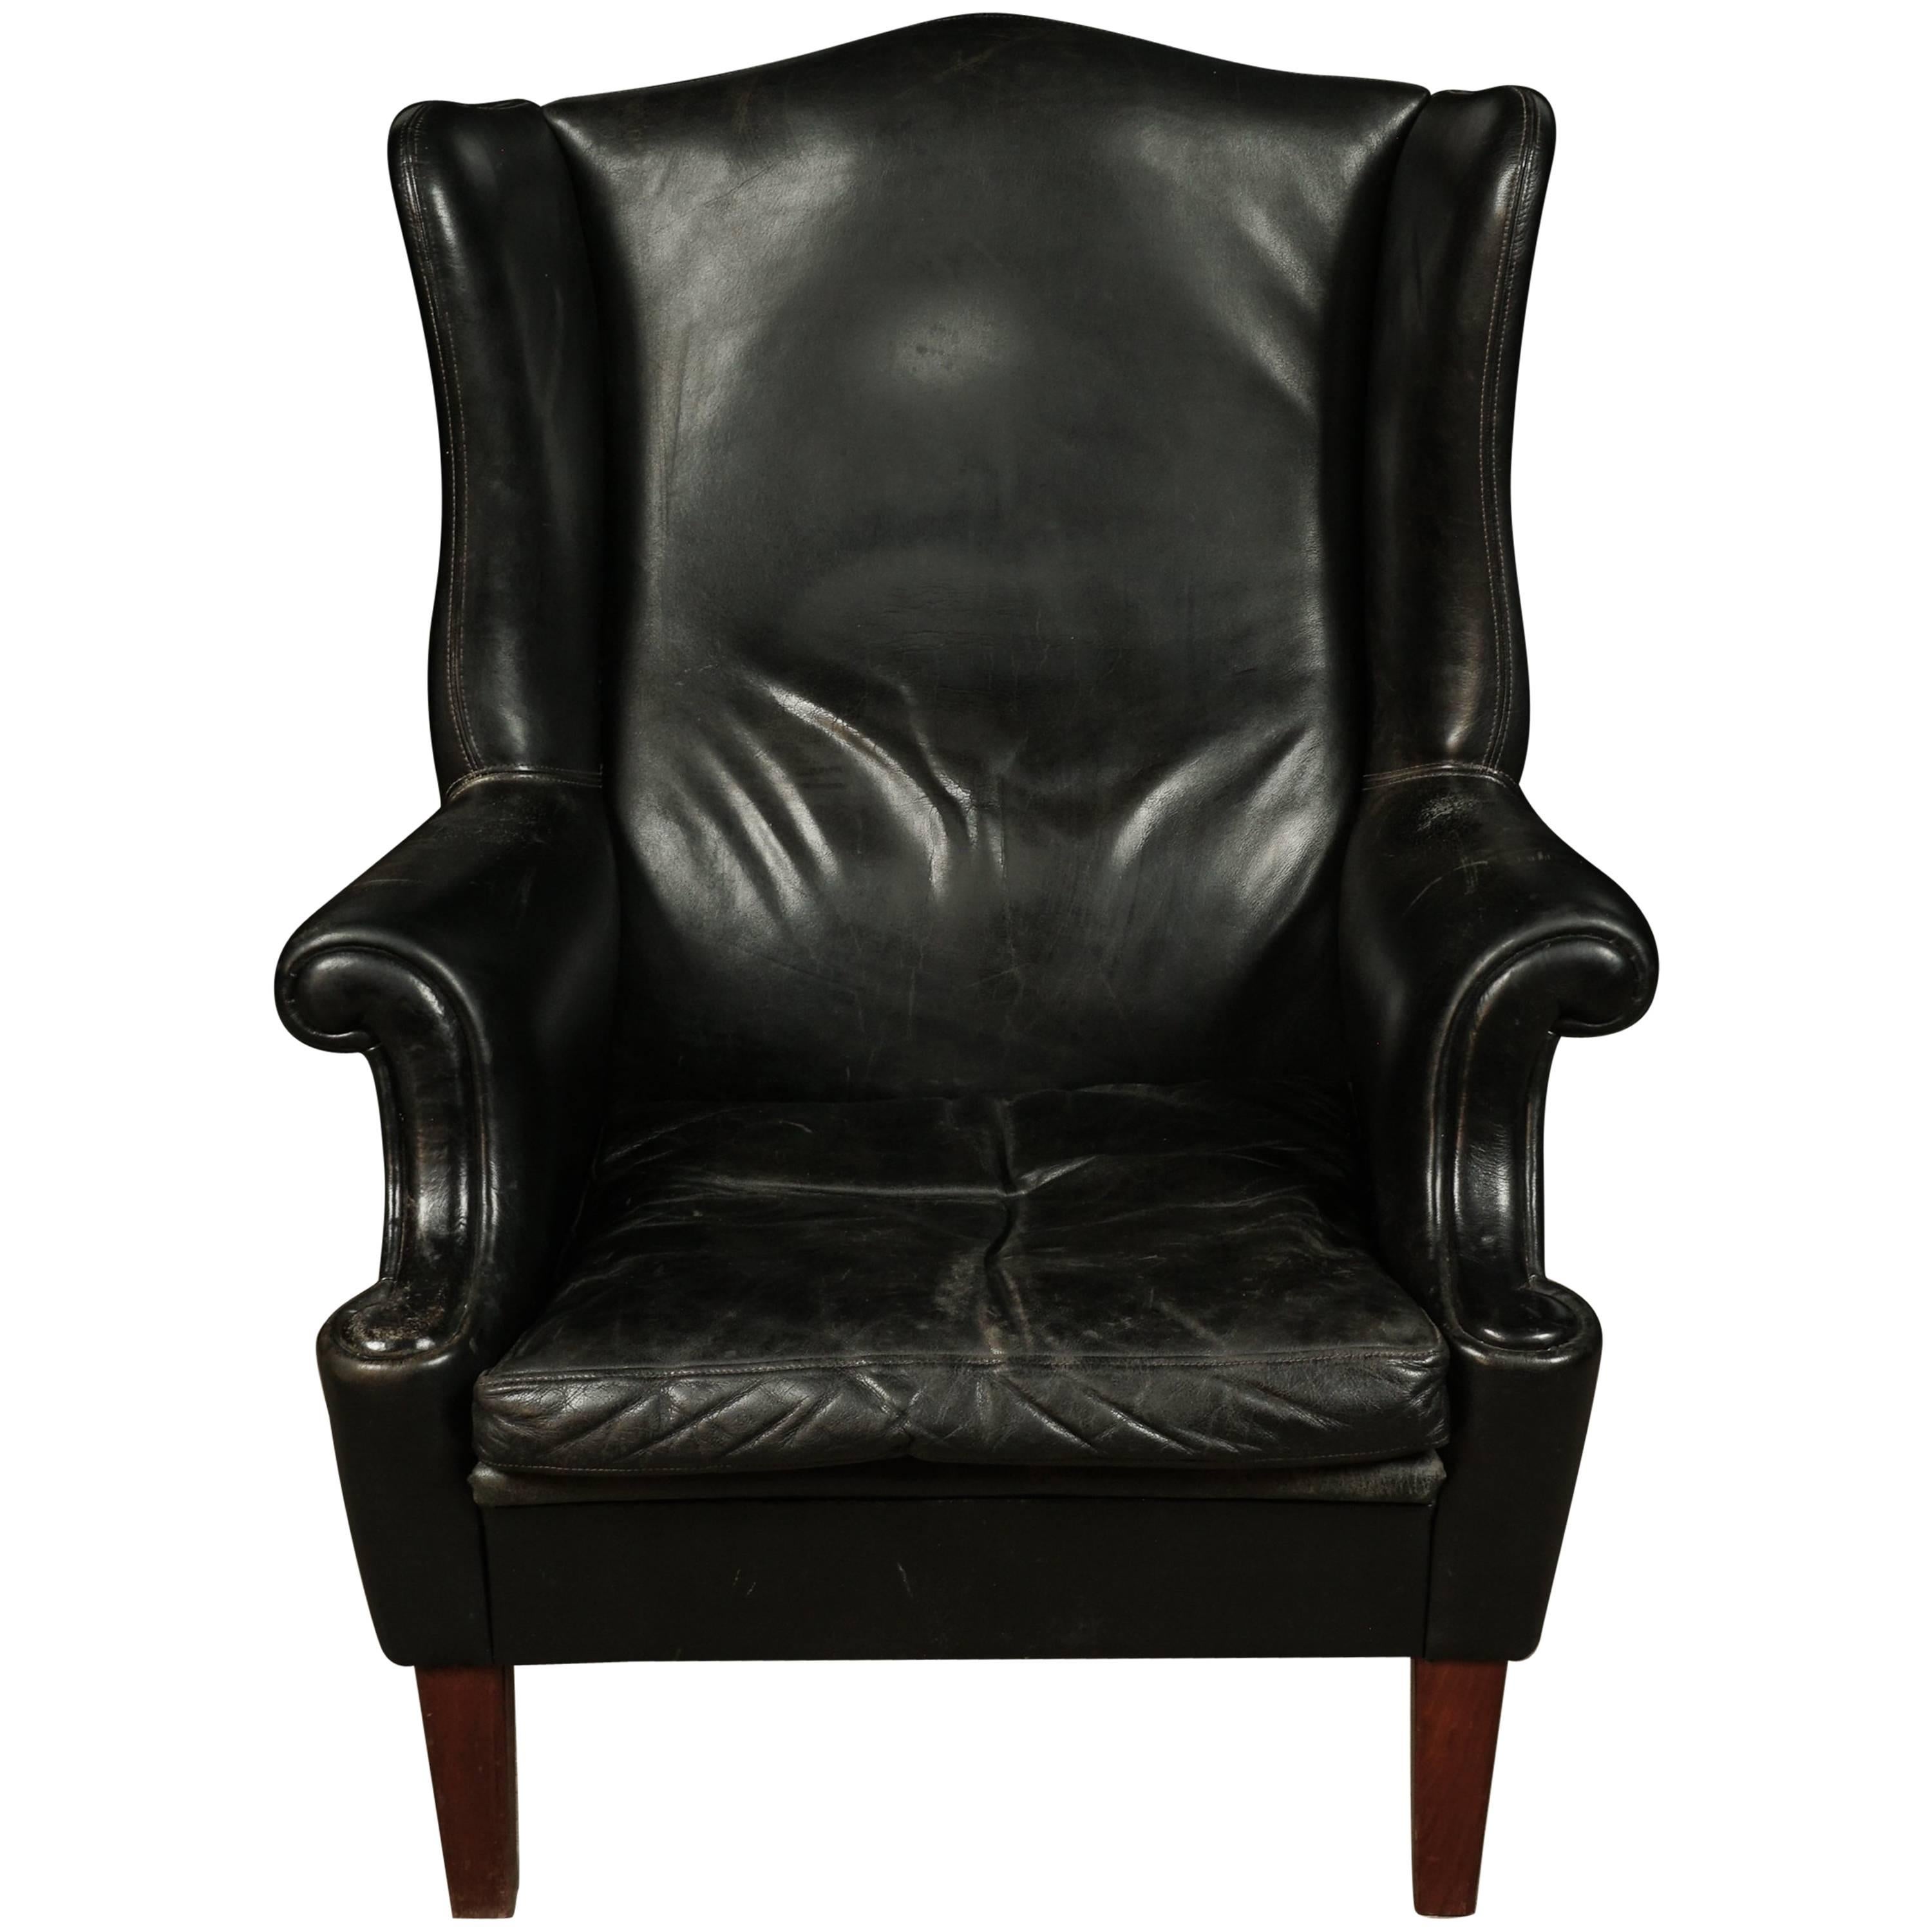 Black Leather Wingback Chair from Denmark, circa 1960